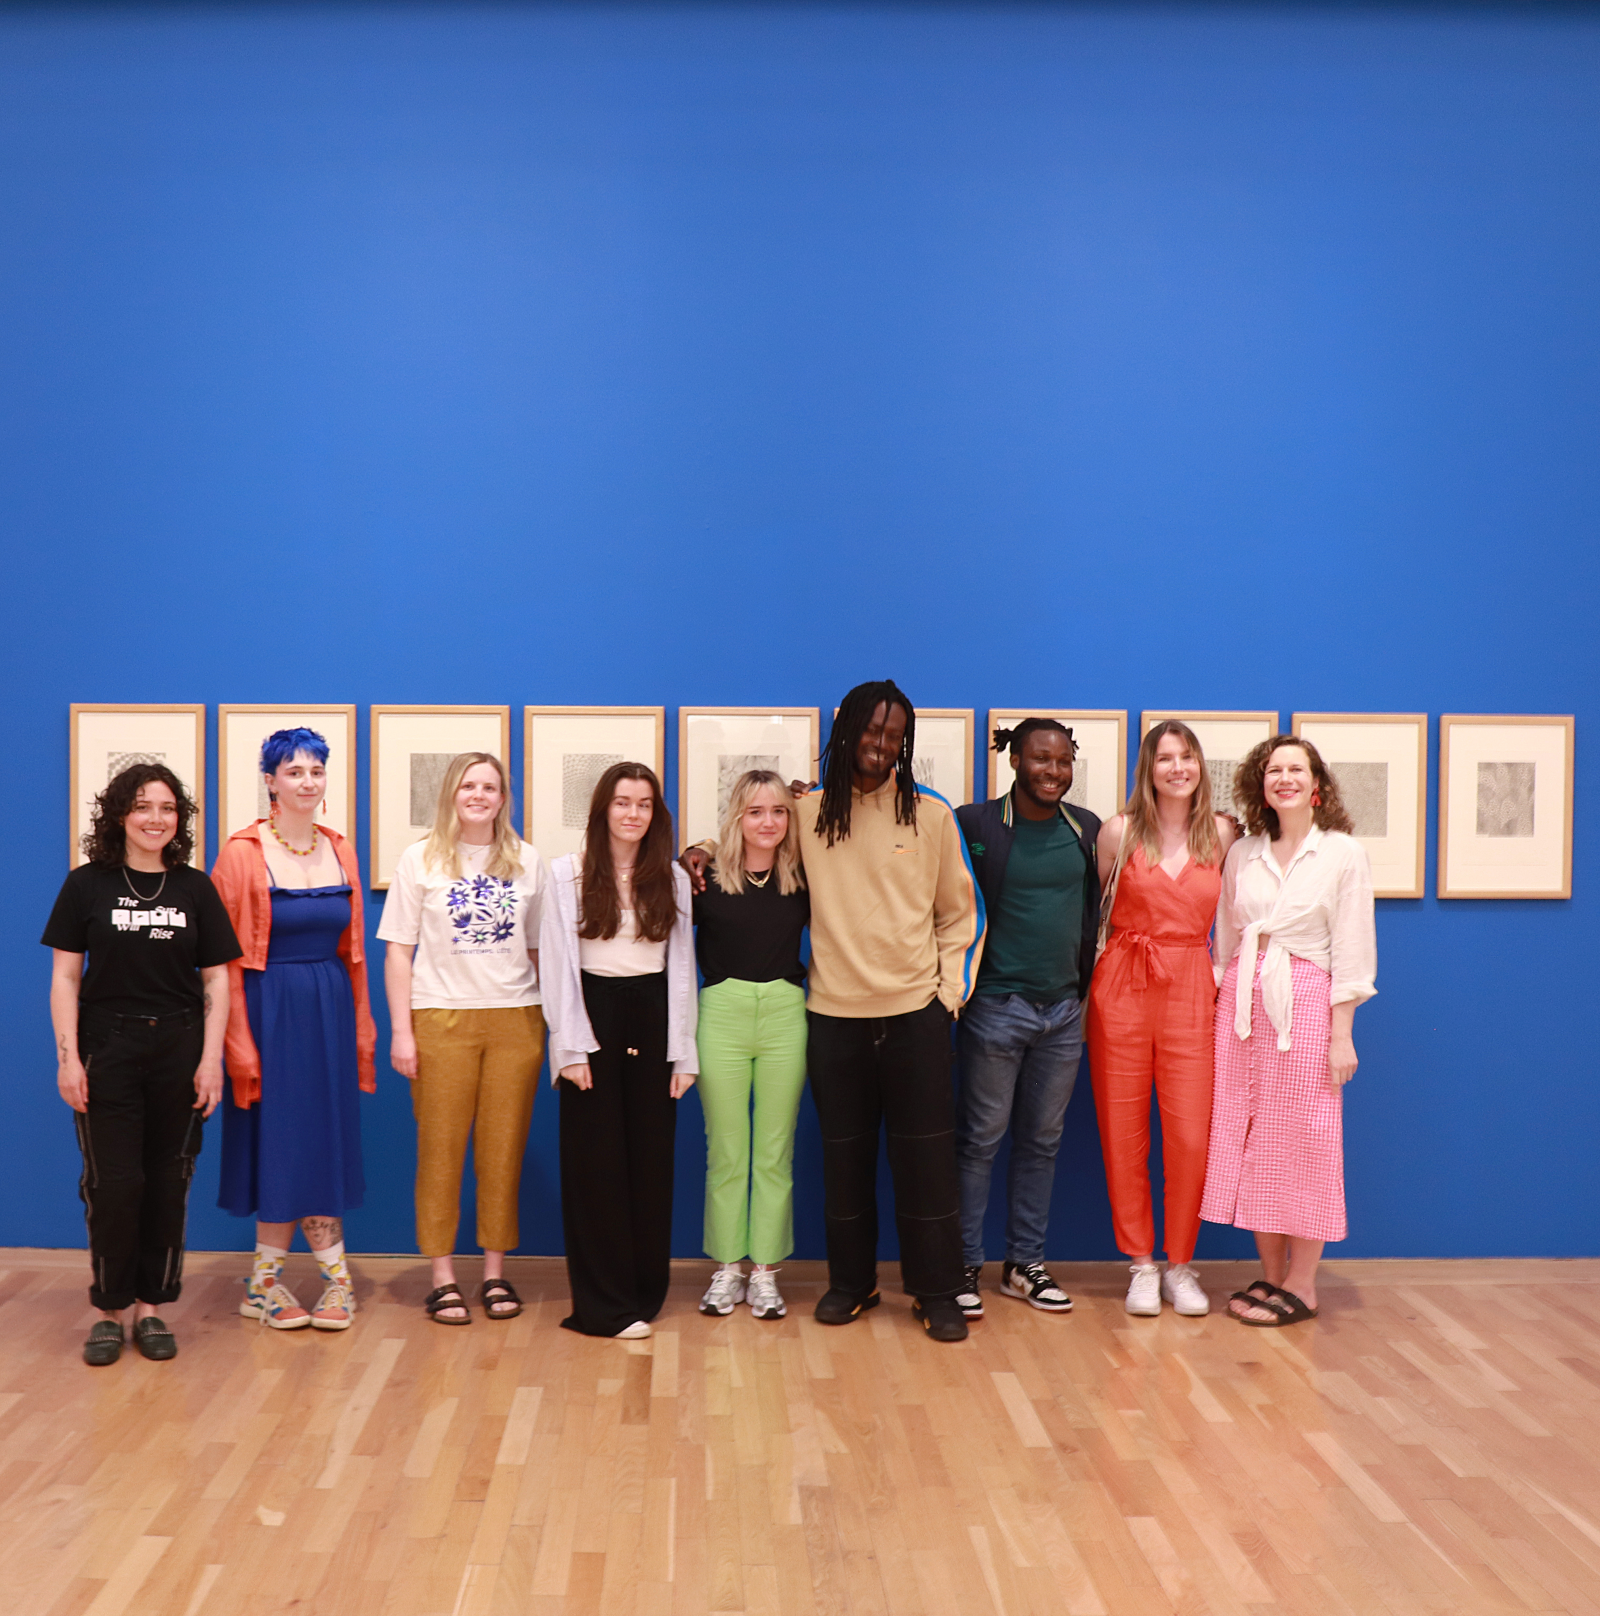 A group of nine people standing in front of a row of prints hanging on a deep blue wall in an art gallery